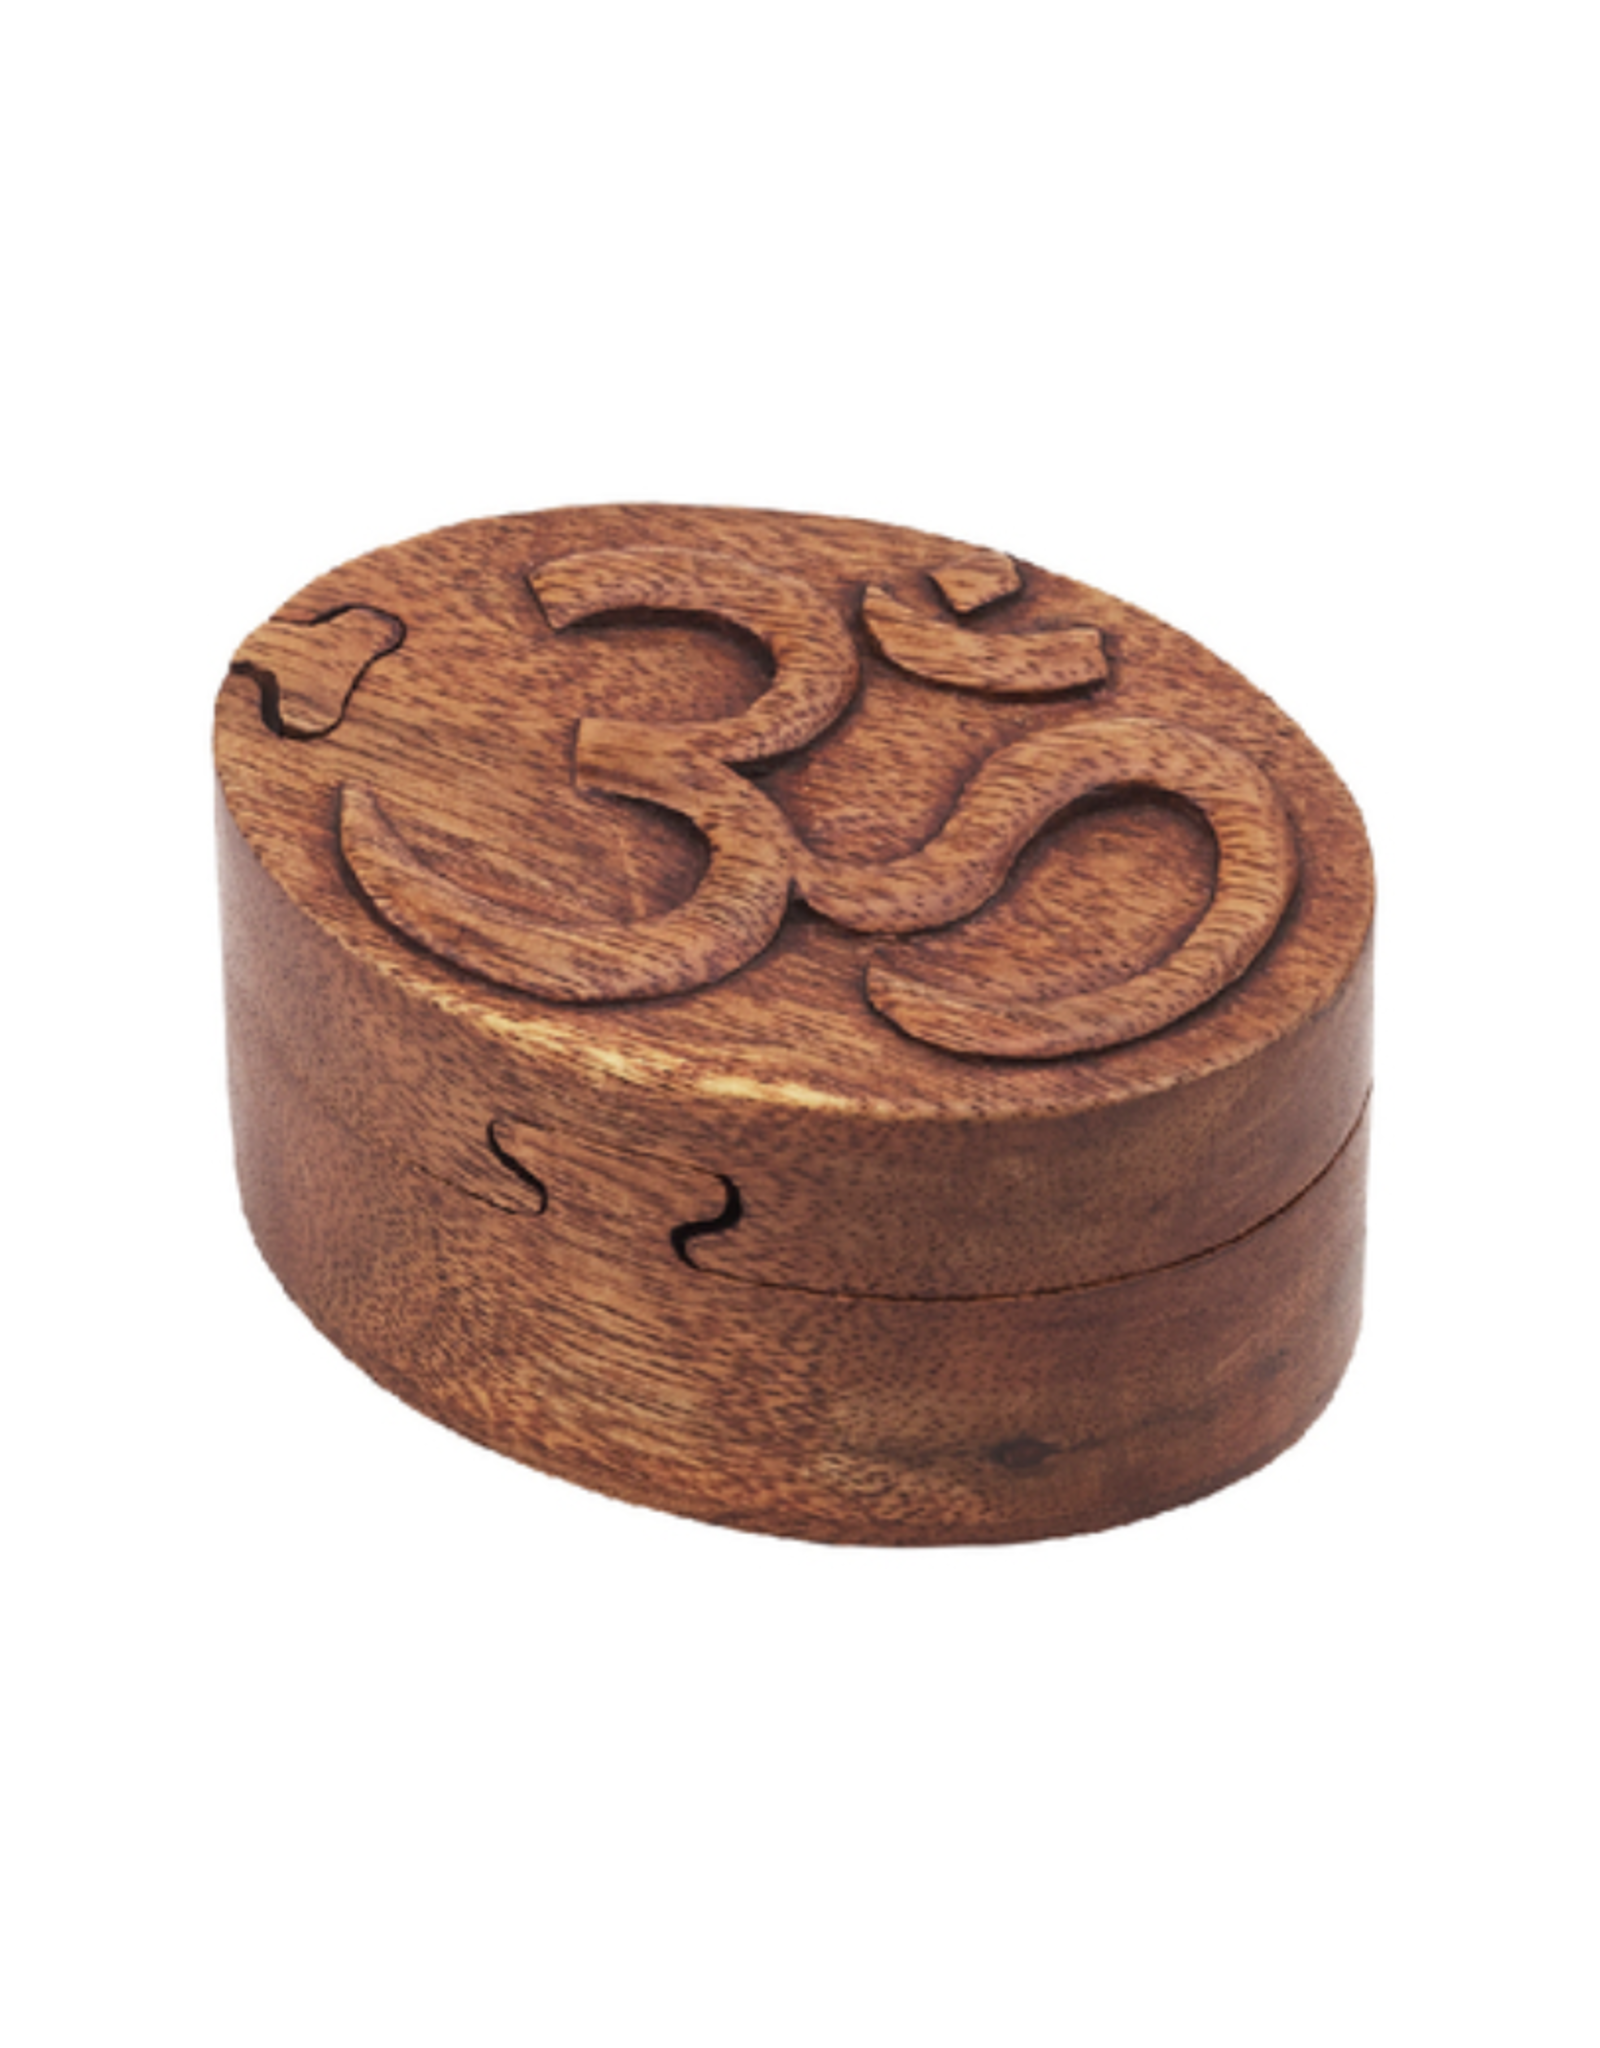 OM Wooden Puzzle Box - 4.5" x 3.25"